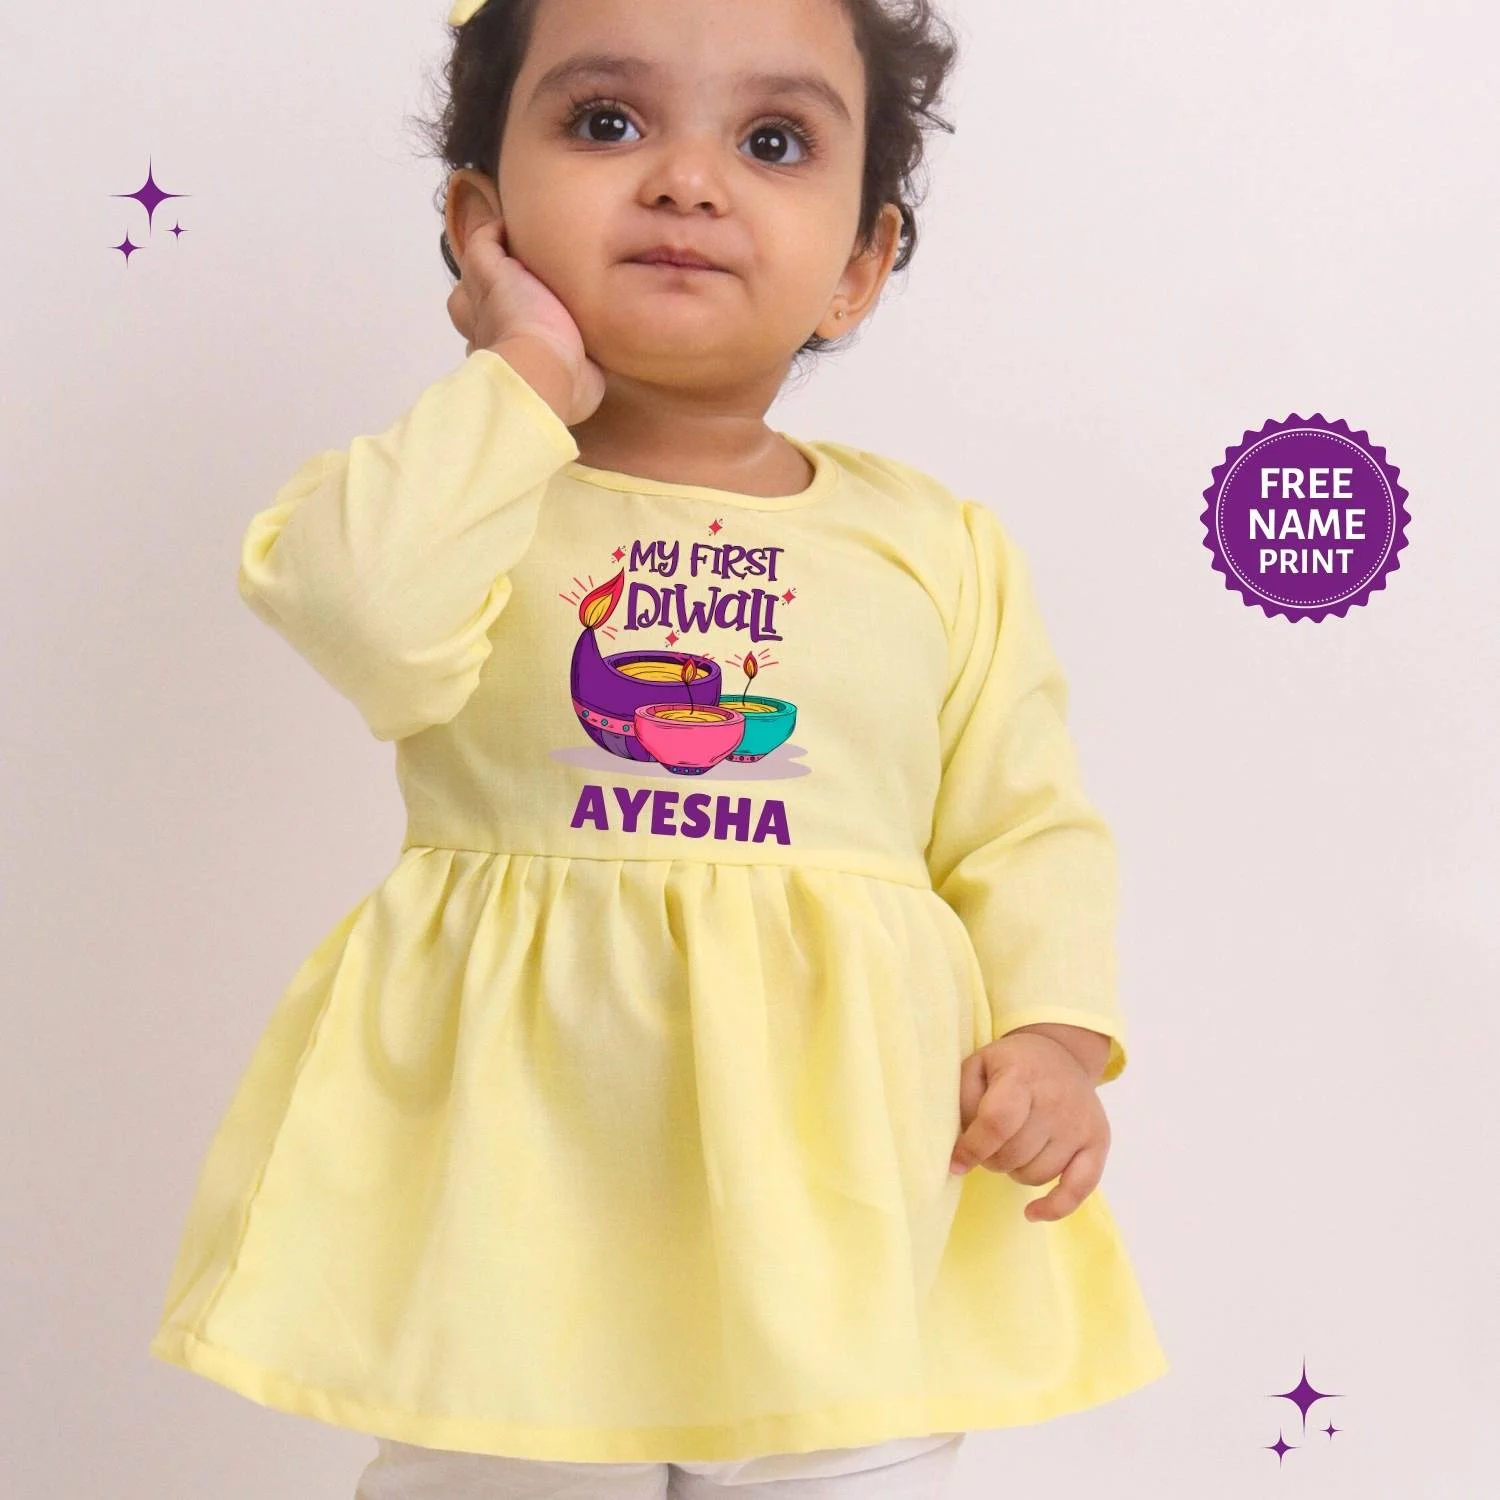 Diwali Baby Outfits - Latest Diwali Kids Dresses Collection 2022